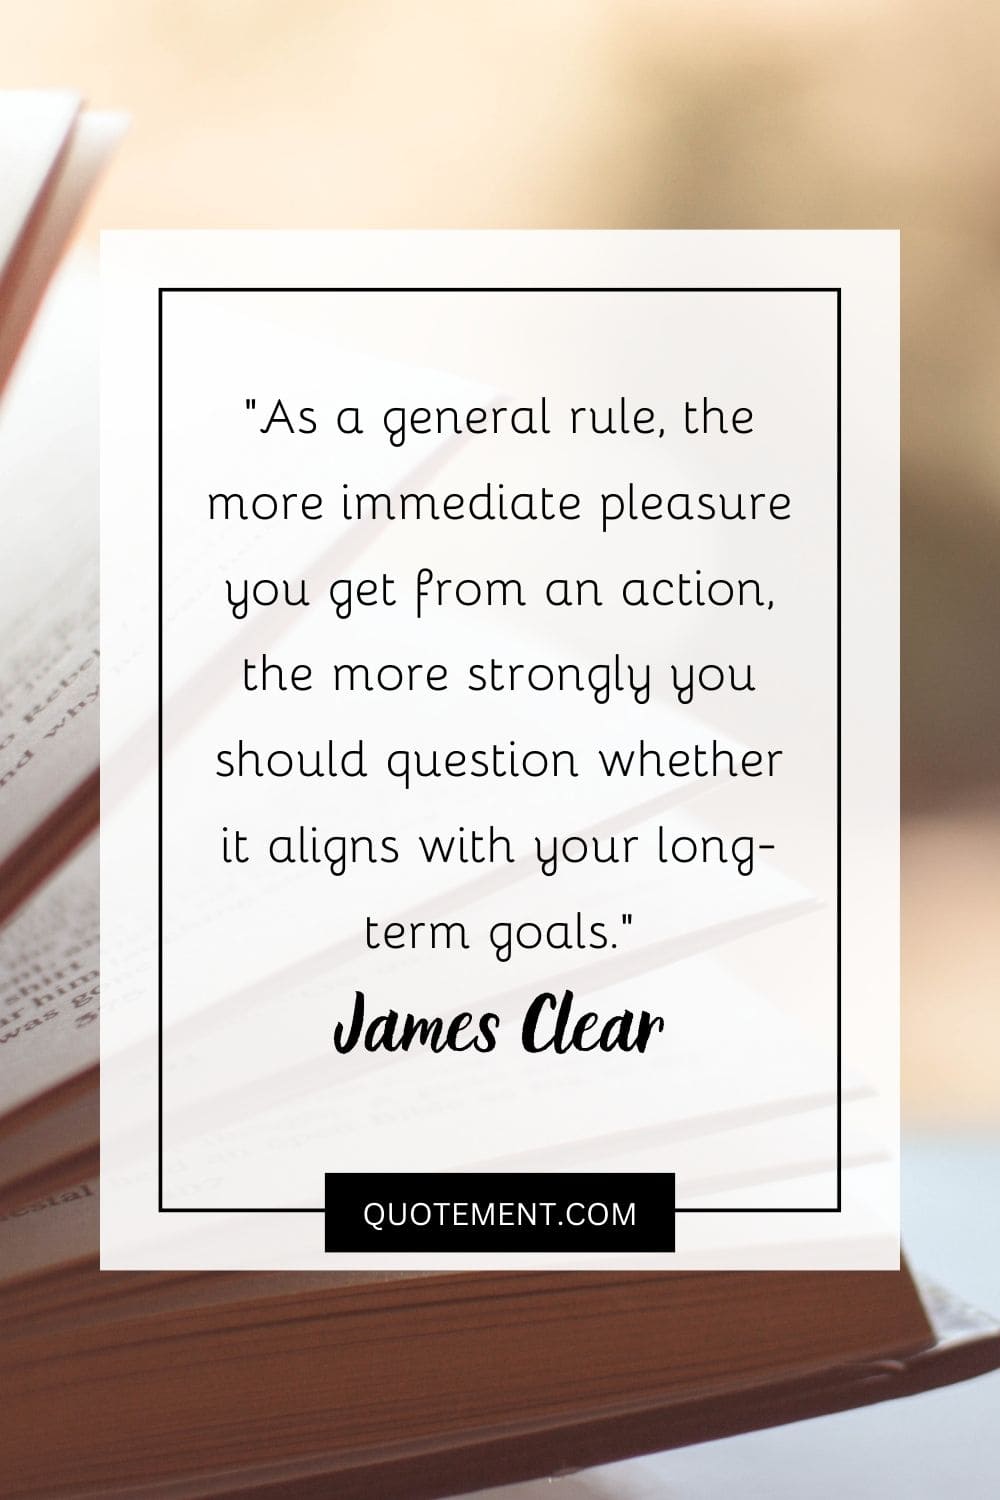 As a general rule, the more immediate pleasure you get from an action, the more strongly you should question whether it aligns with your long-term goals.